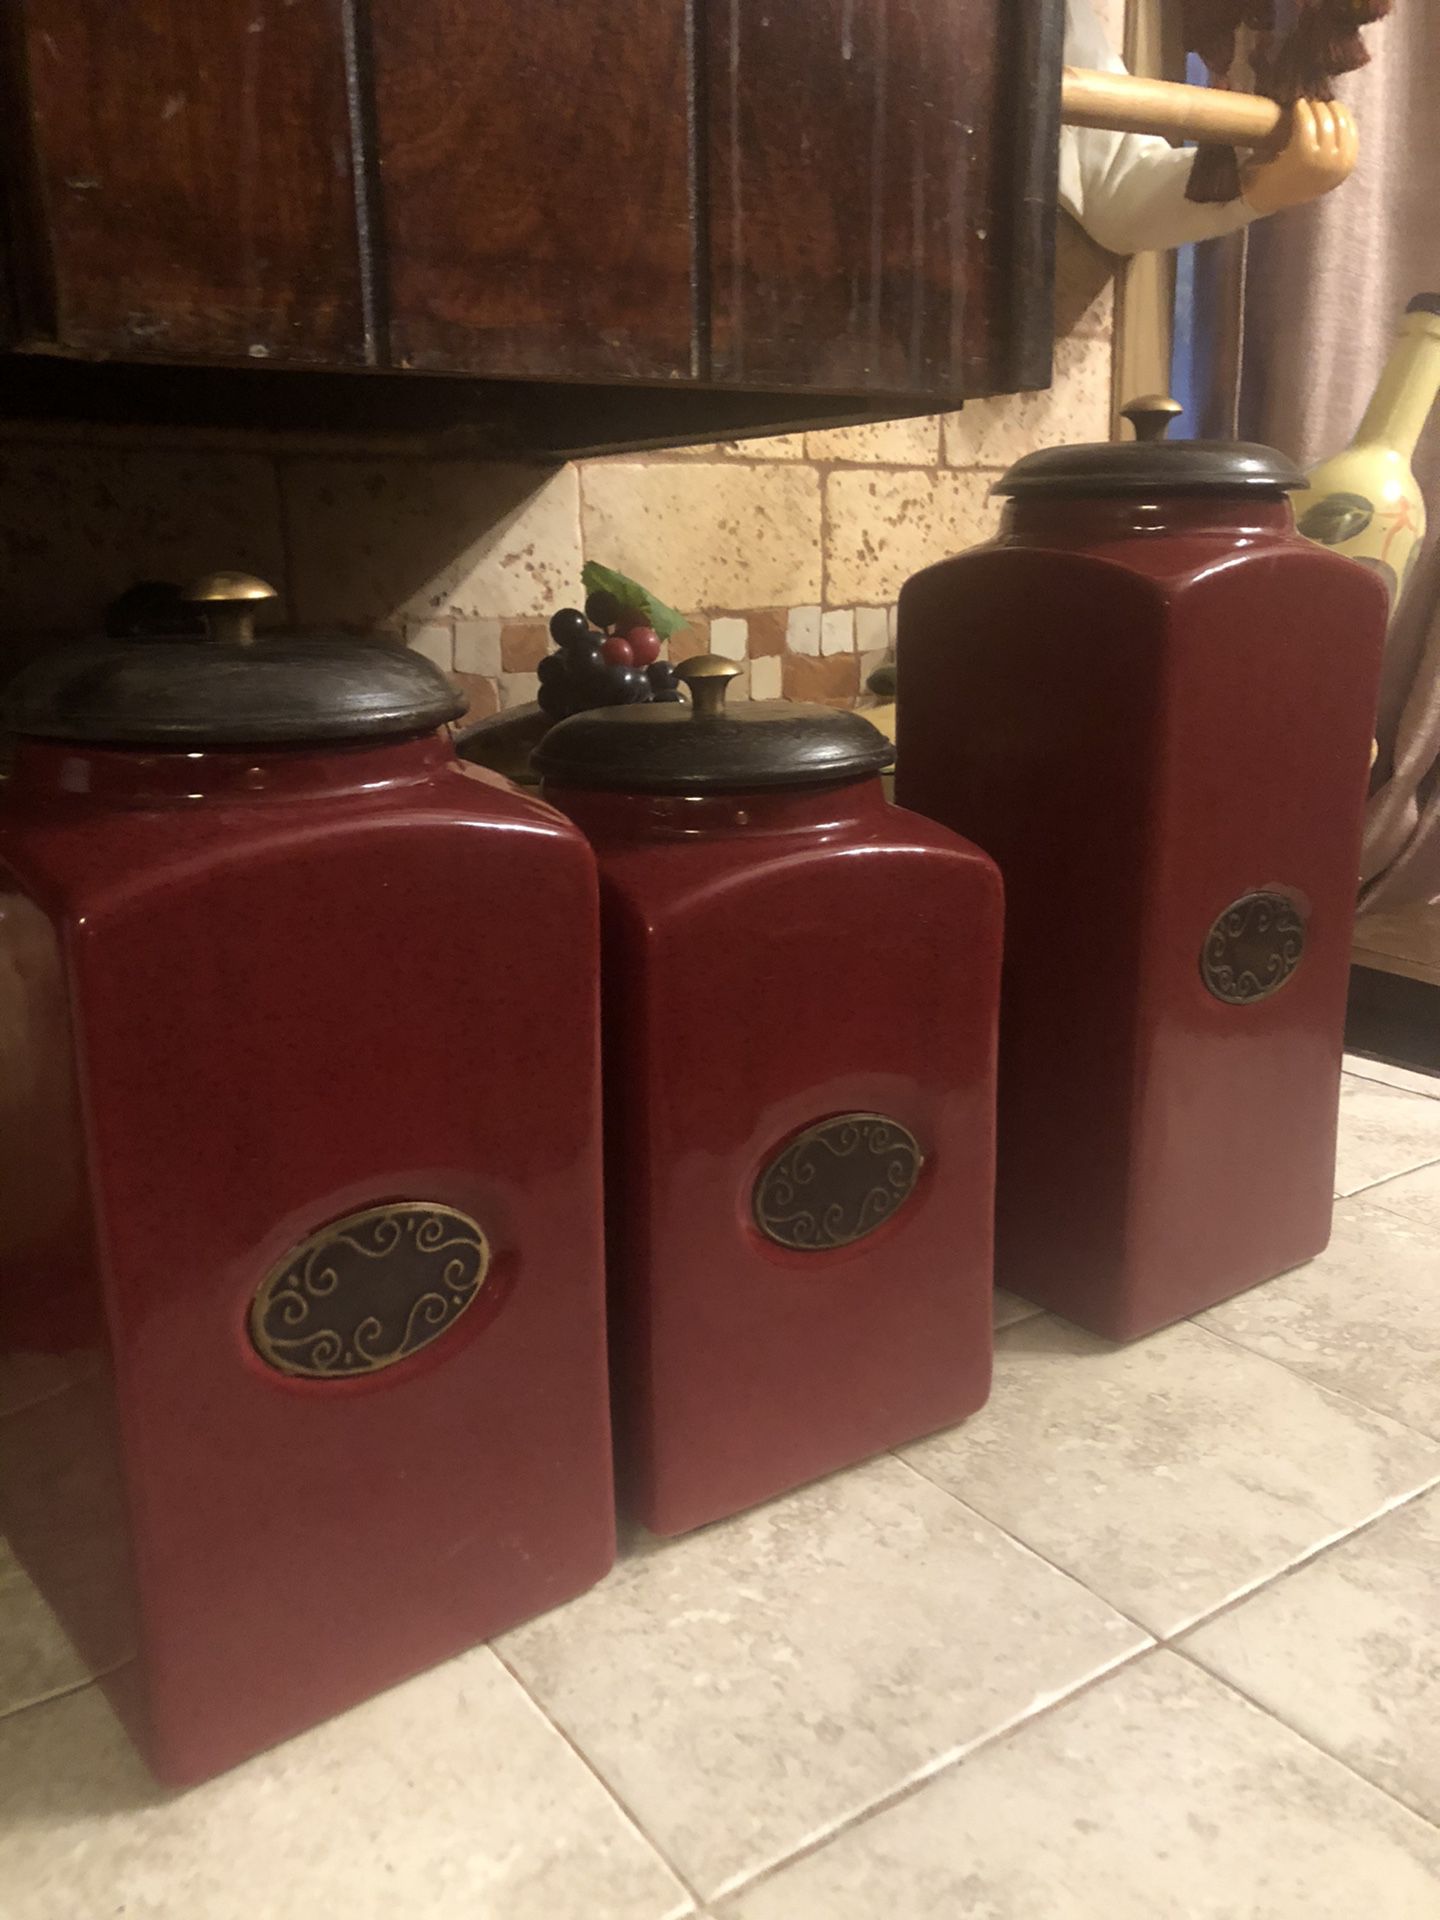 Pier 1 Imports kitchen canisters